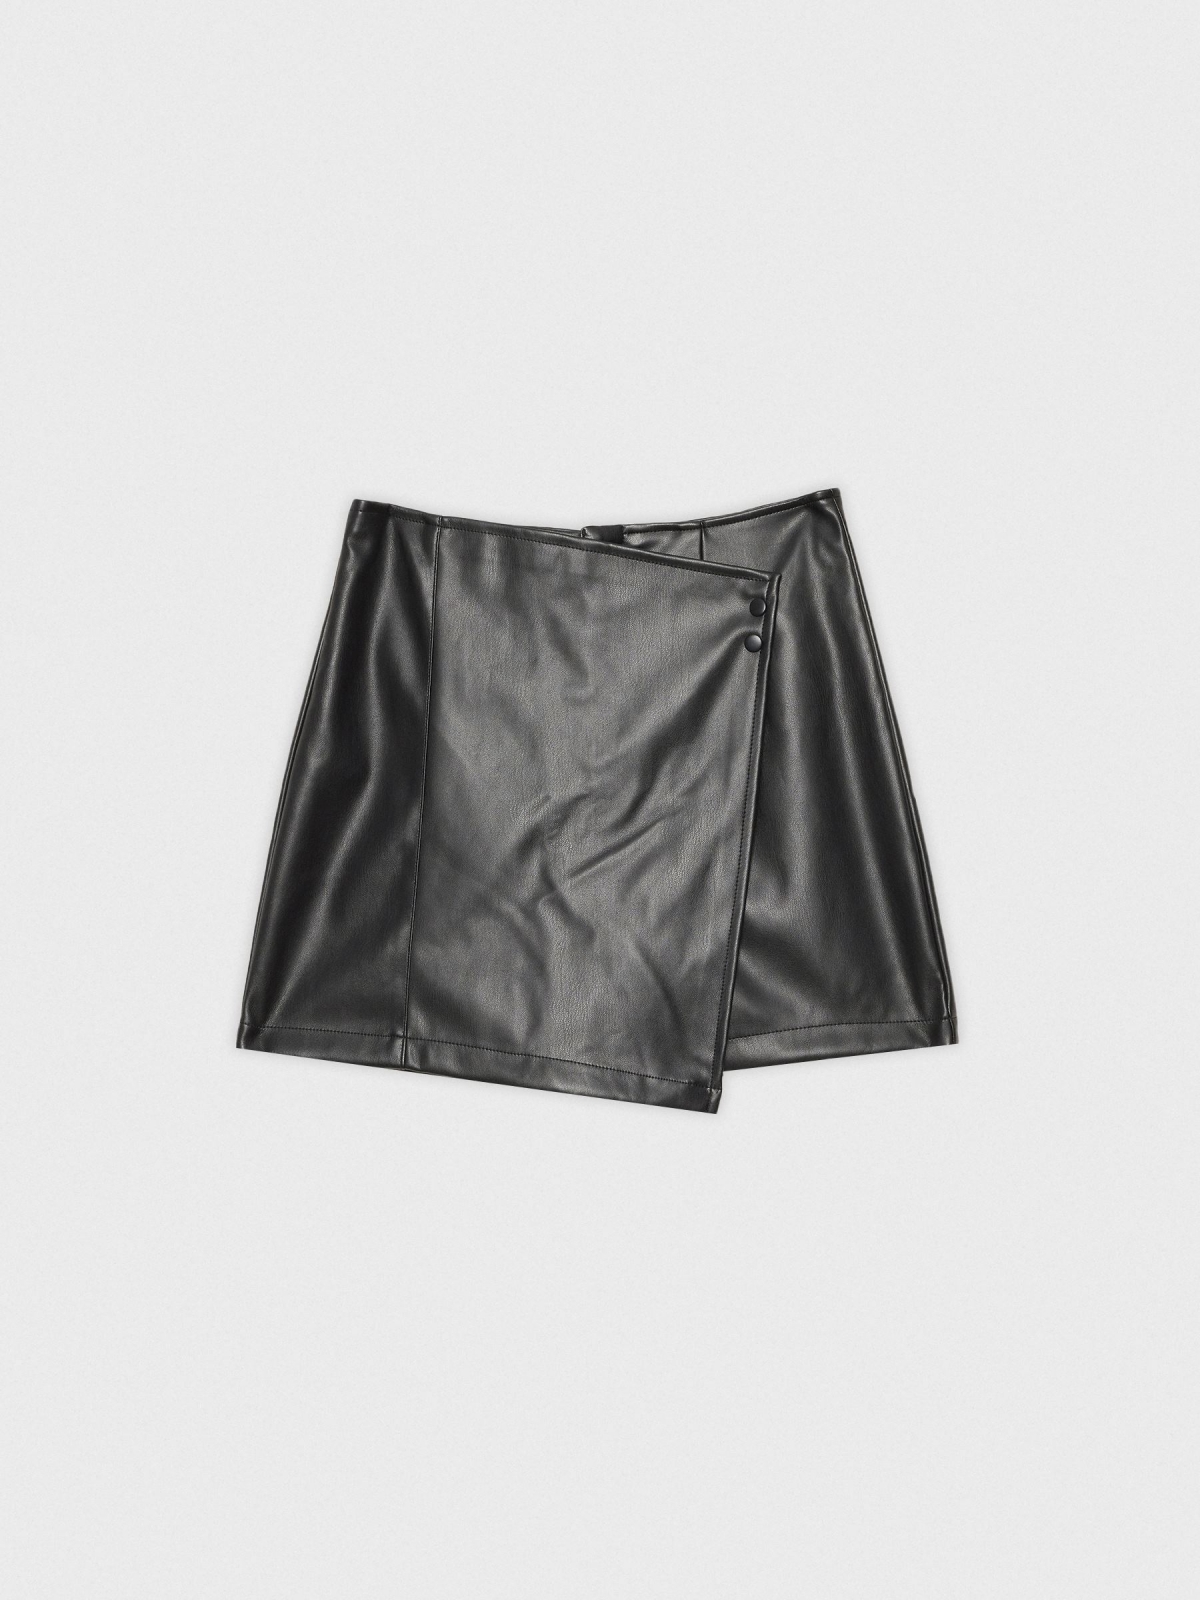  Patent leather skort with buttons black